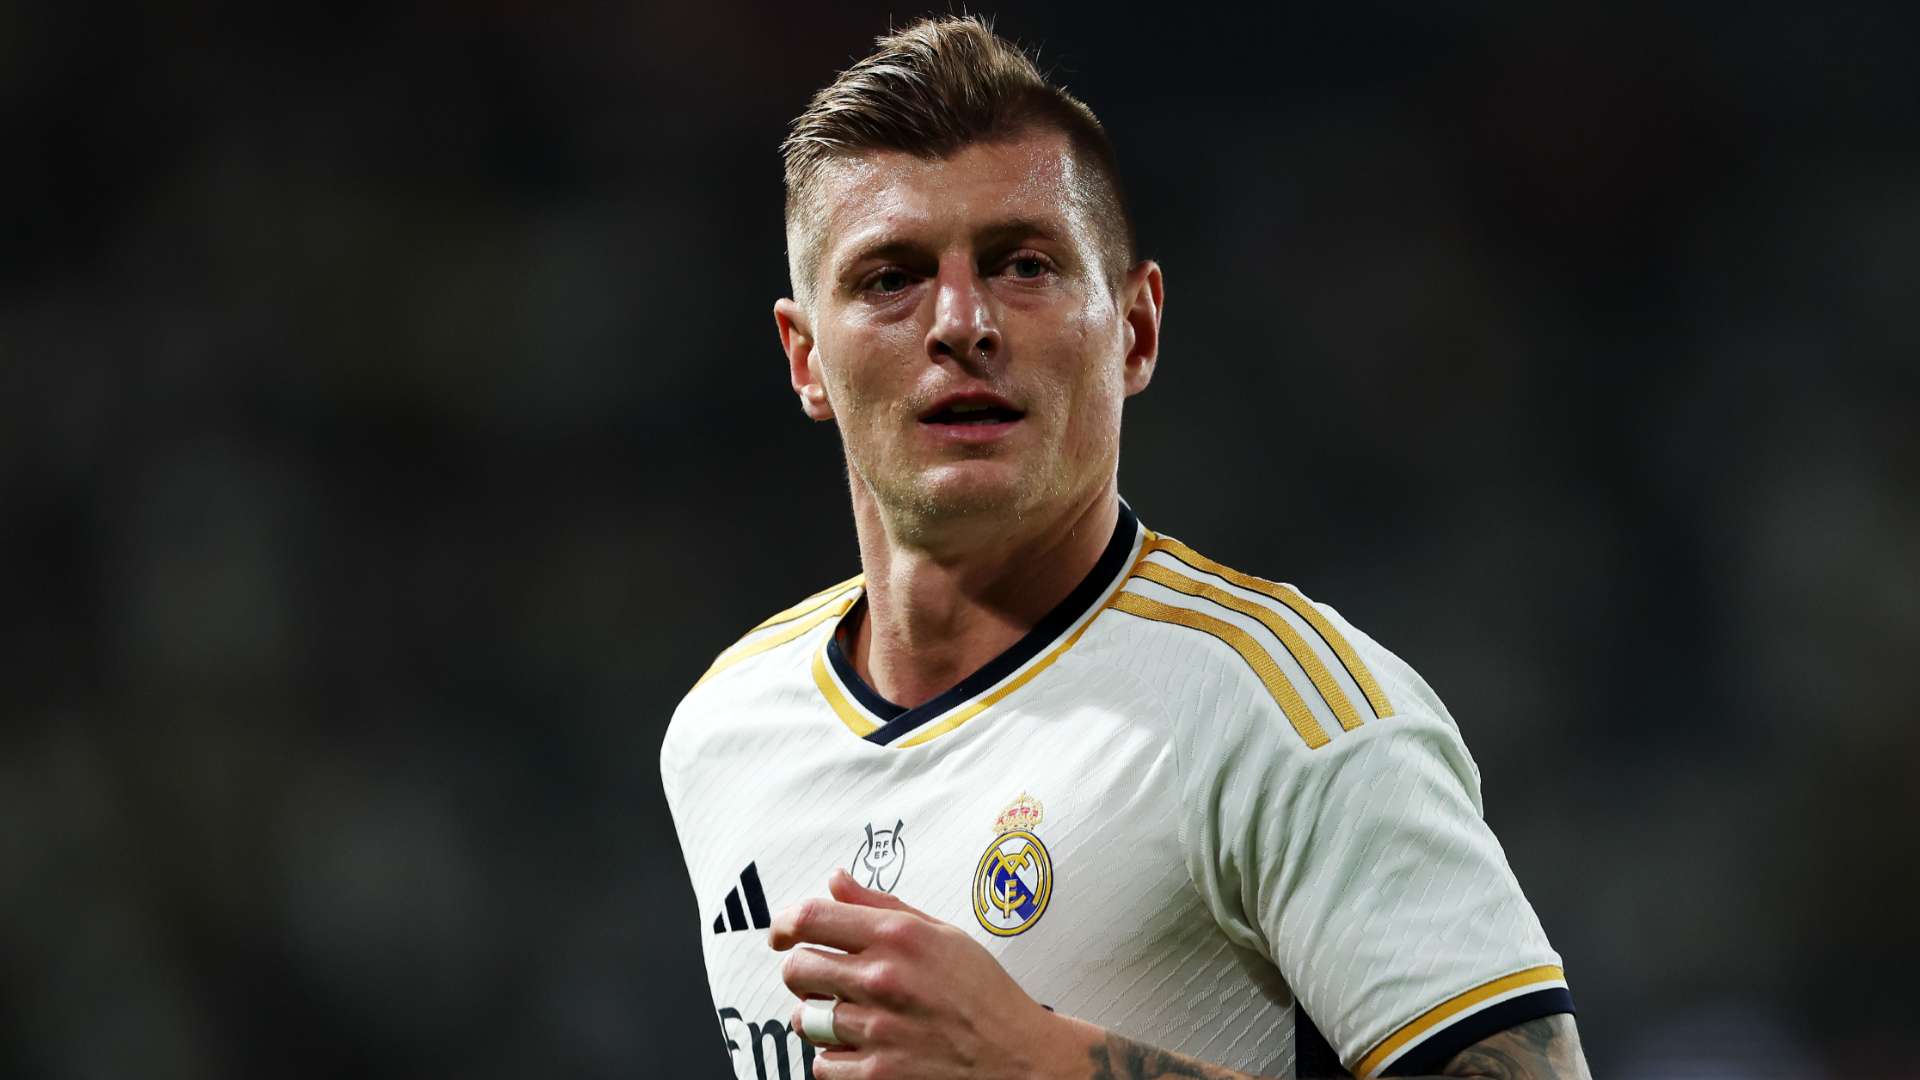 Florent Malouda urges Chelsea to sign Real Madrid star Toni Kroos.